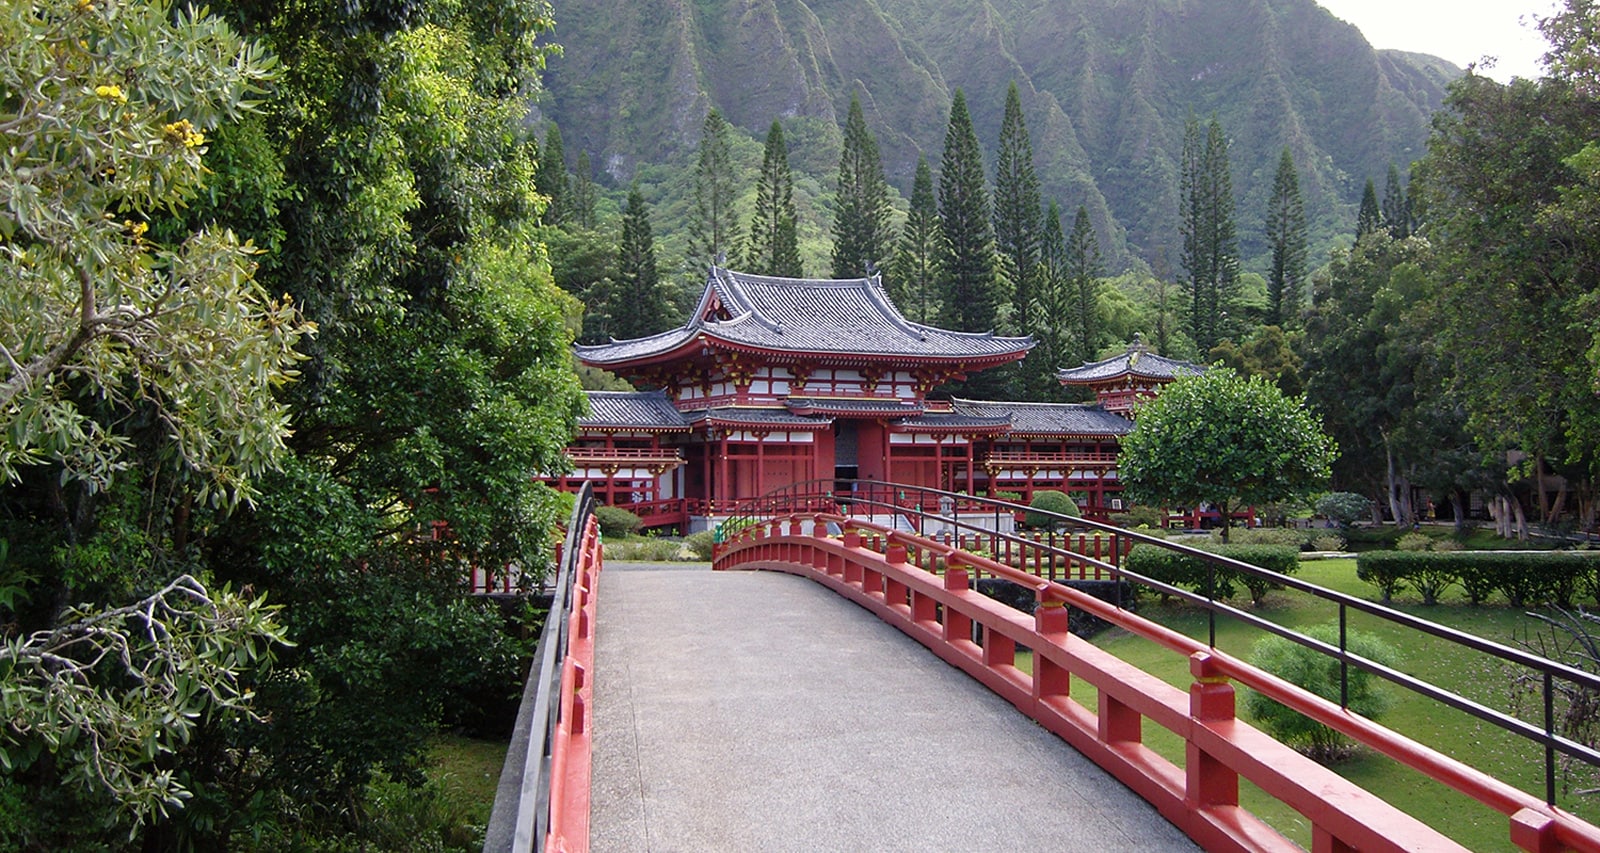 A wooden bridge leading to a temple situated in a verdant valley